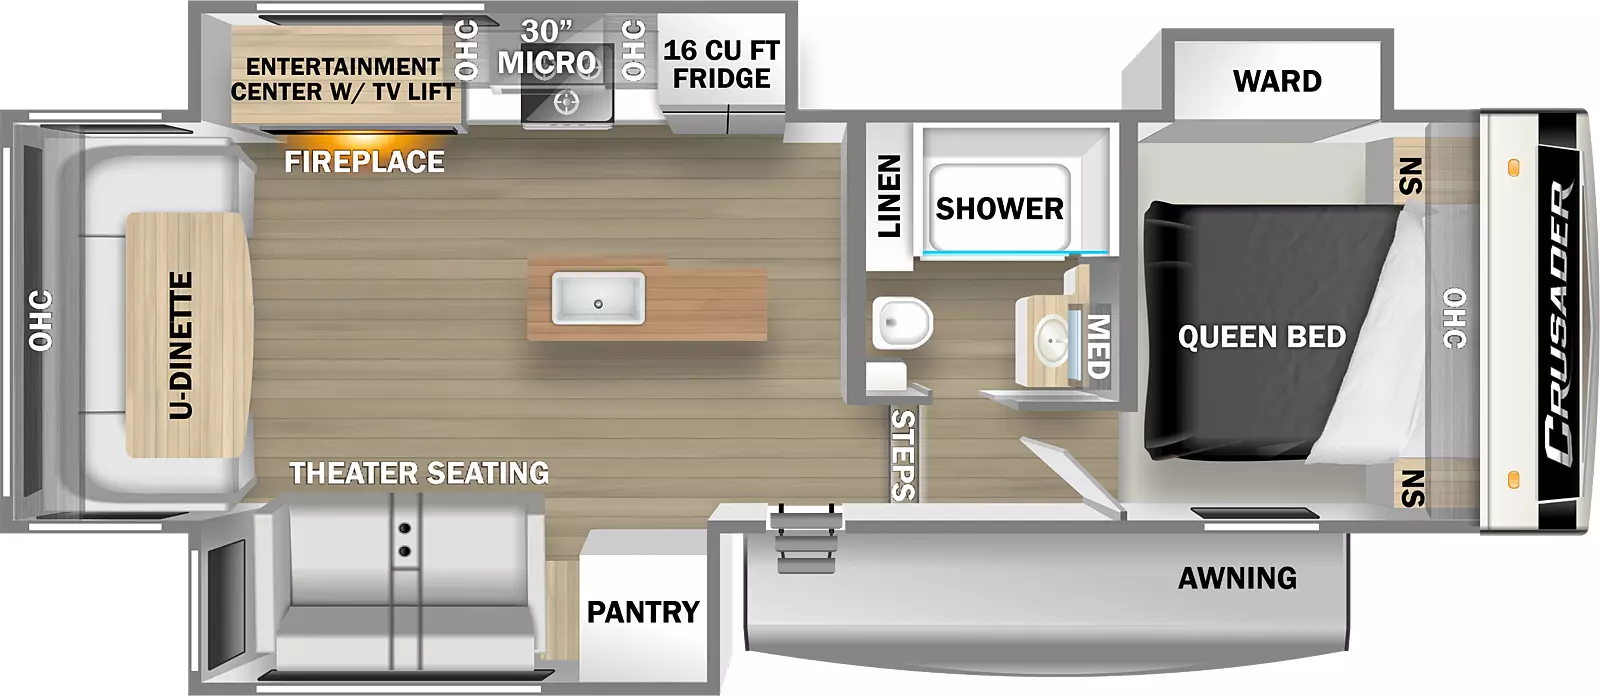 The 260RDD has three slideouts and one entry door. Exterior features an awning. Interior layout front to back: front queen bed with overhead cabinets and night stands on each side, and and off-door side wardrobe slideout; off-door side bathroom with linen closet and medicine cabinet; two steps down to the entry door and living area; off-door side slideout with 16 cubic foot refrigerator, overhead cabinets, microwave, cooktop, entertainment center with TV lift and fireplace below; door side slideout with pantry and theater seating; kitchen island with sink; rear u-dinette with overhead cabinets.